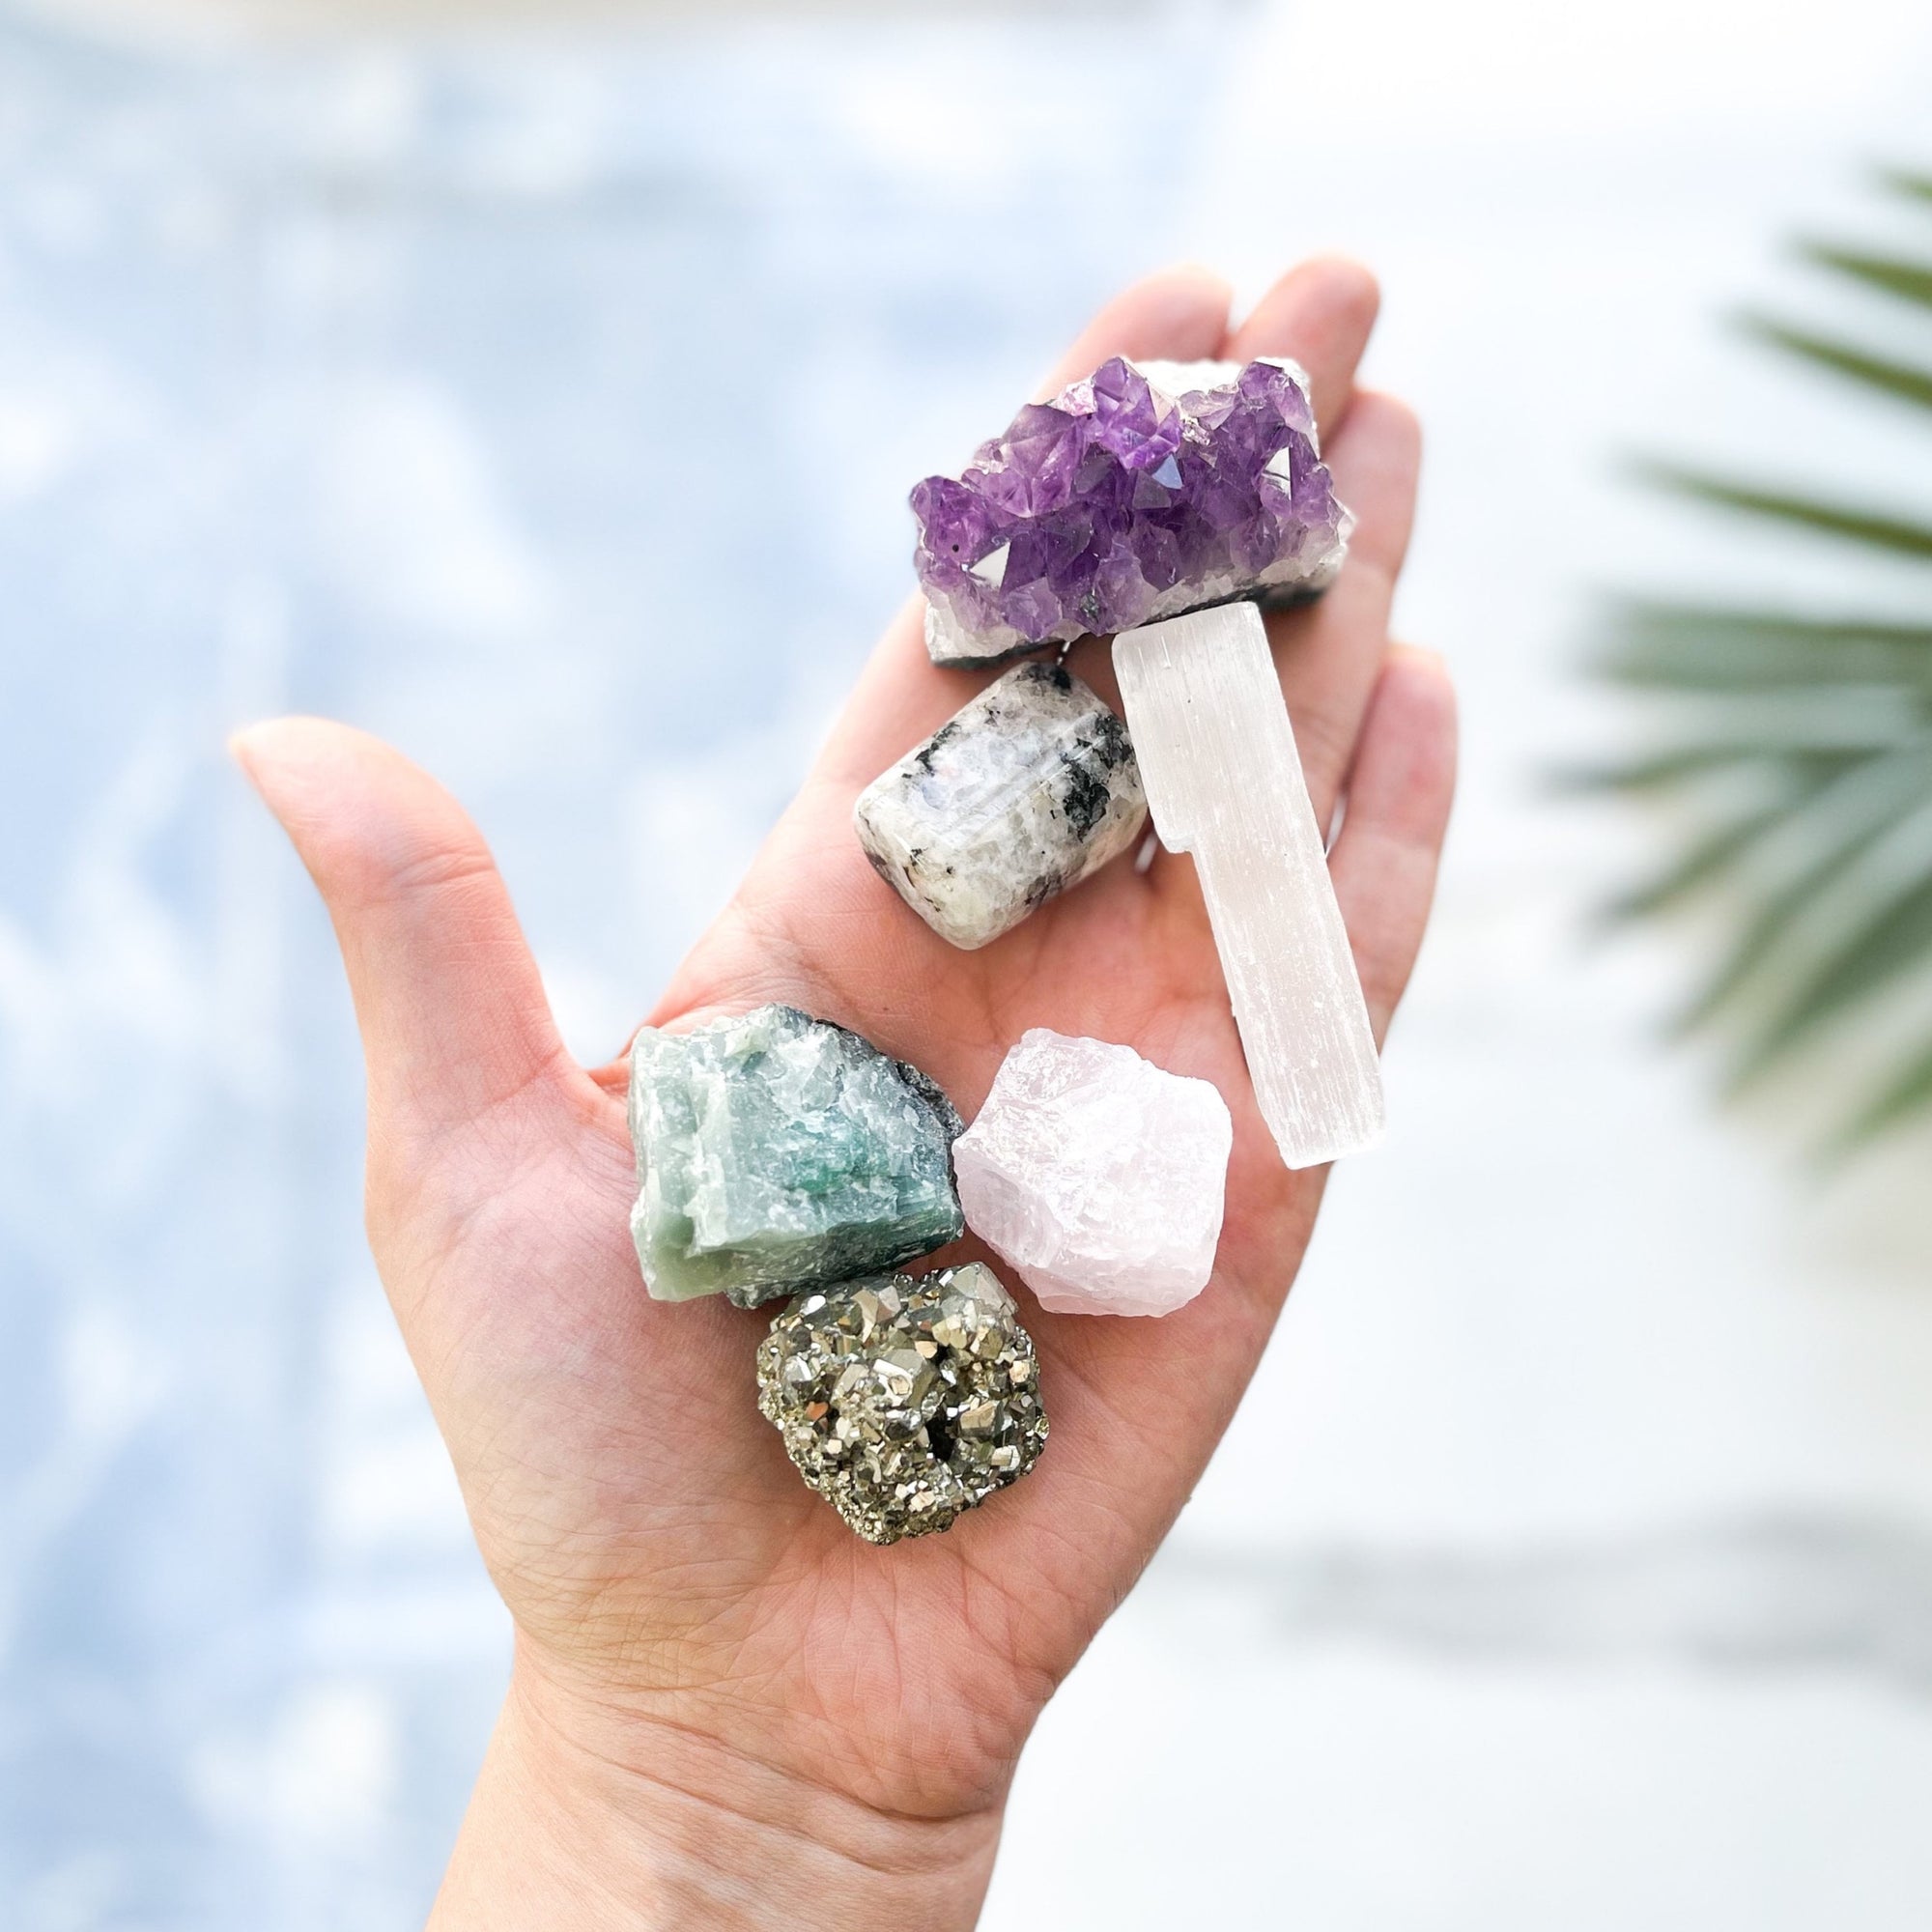 Enhance Your Beauty Routine with the Beauty Rock Crystal Set